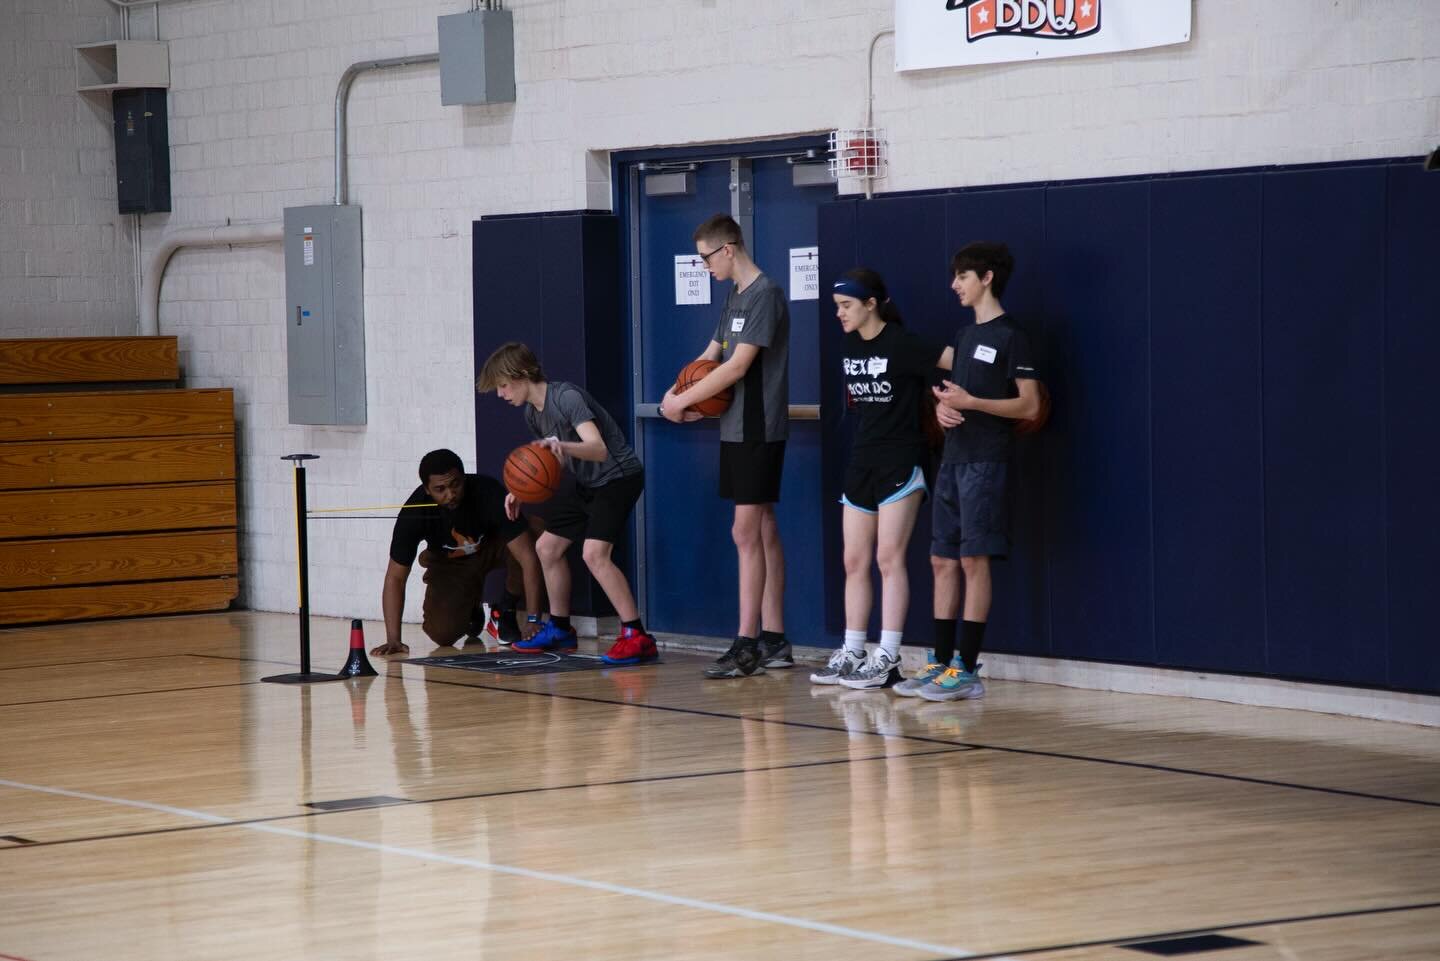 Over the past few months MOF has partnered with Under the Radar to train the middle school and high school basketball teams for a local school. We use a number of different tools and methods to help each player with the skills they need to enhance th